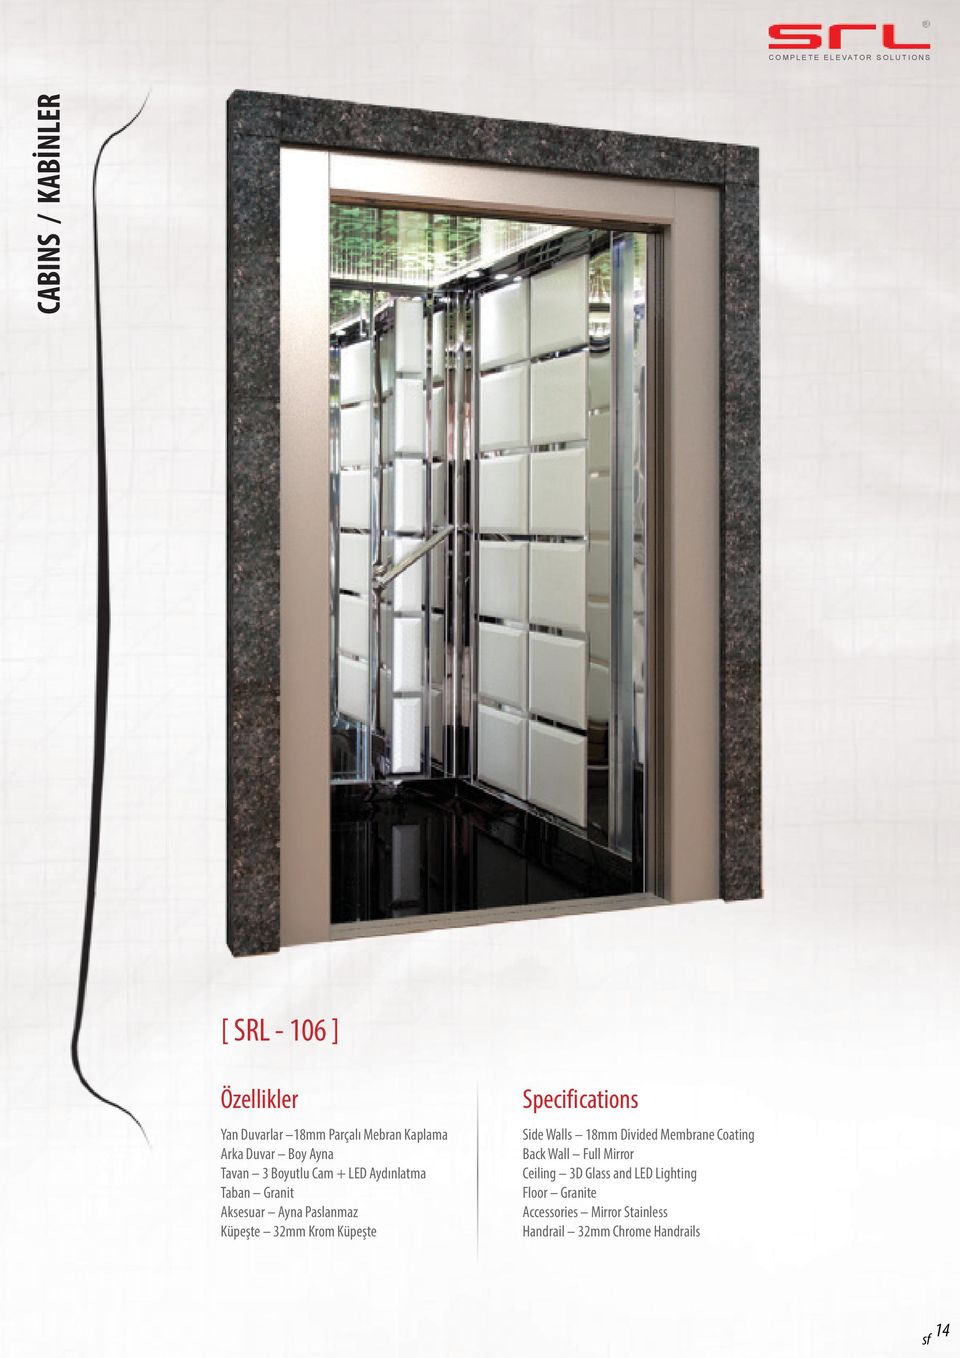 Küpeşte Specifications Side Walls 18mm Divided Membrane Coating Back Wall Full Mirror Ceiling 3D